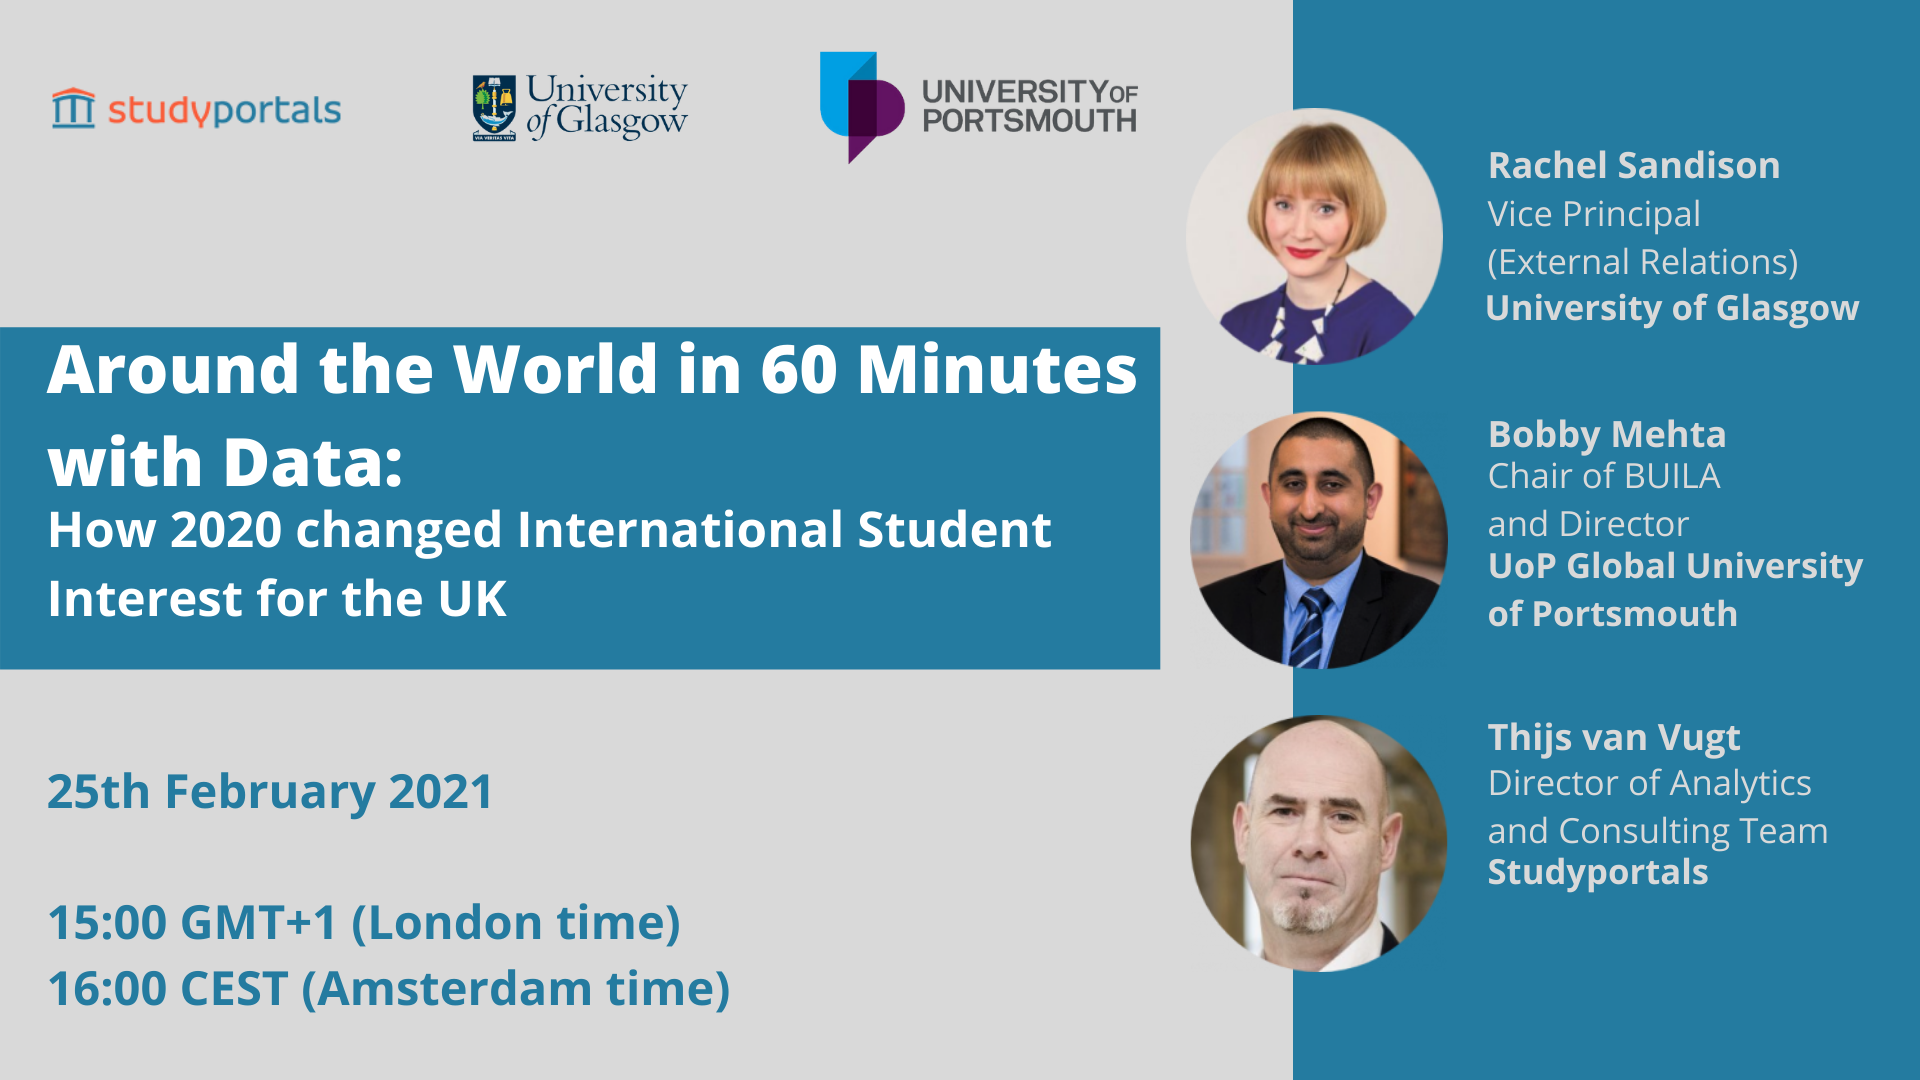 Around the World in 60 Minutes with Data: How 2020 changed International Student Interest for the UK